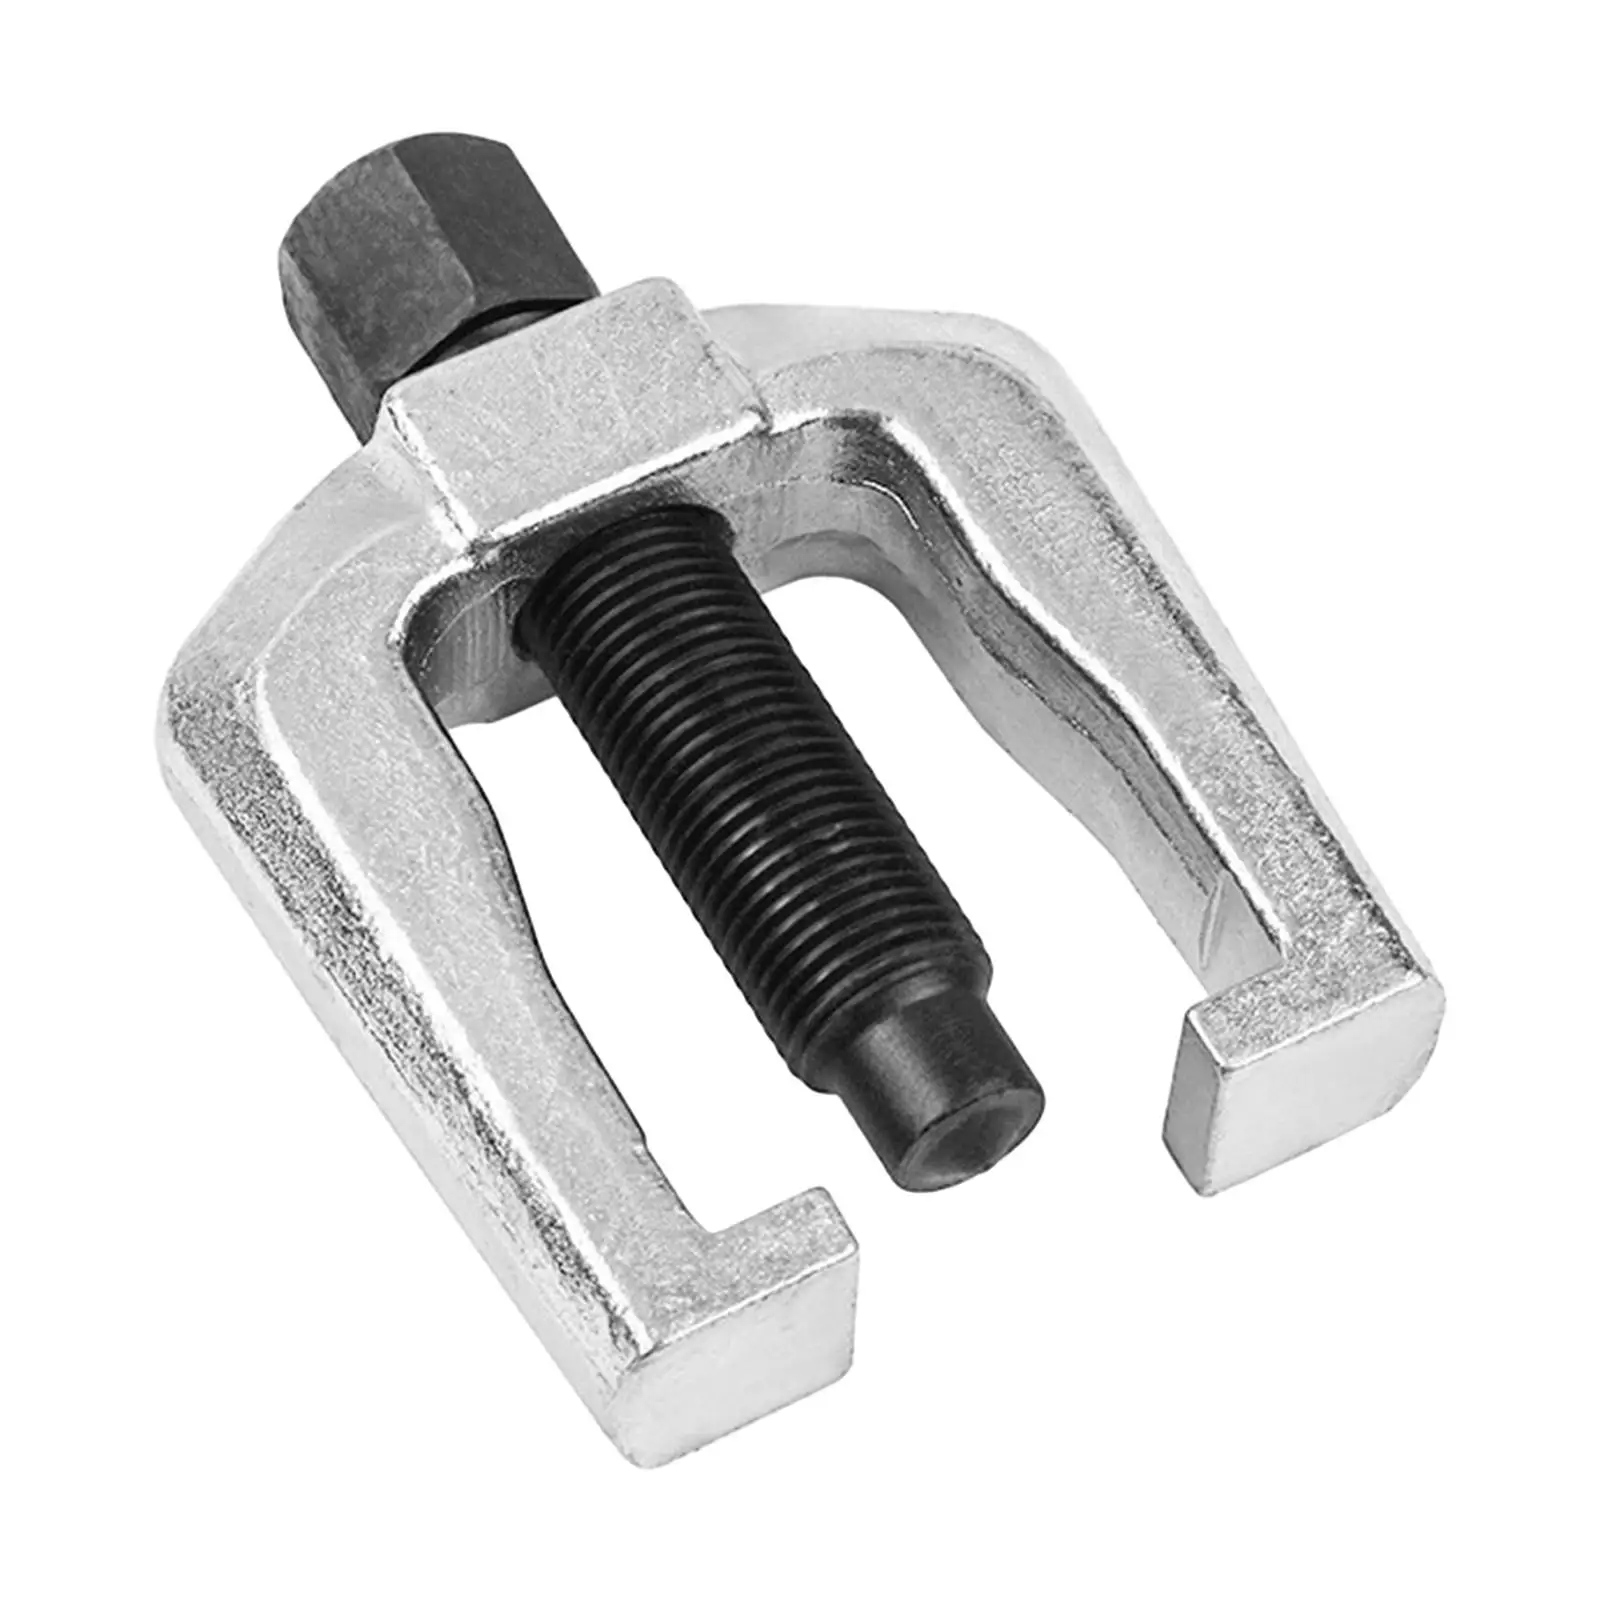 Slack Adjuster Puller Works on Automatic Adjusters Sturdy Compact 2 Jaw Gear Puller Durable Removal Tool for Gears Remover Tool